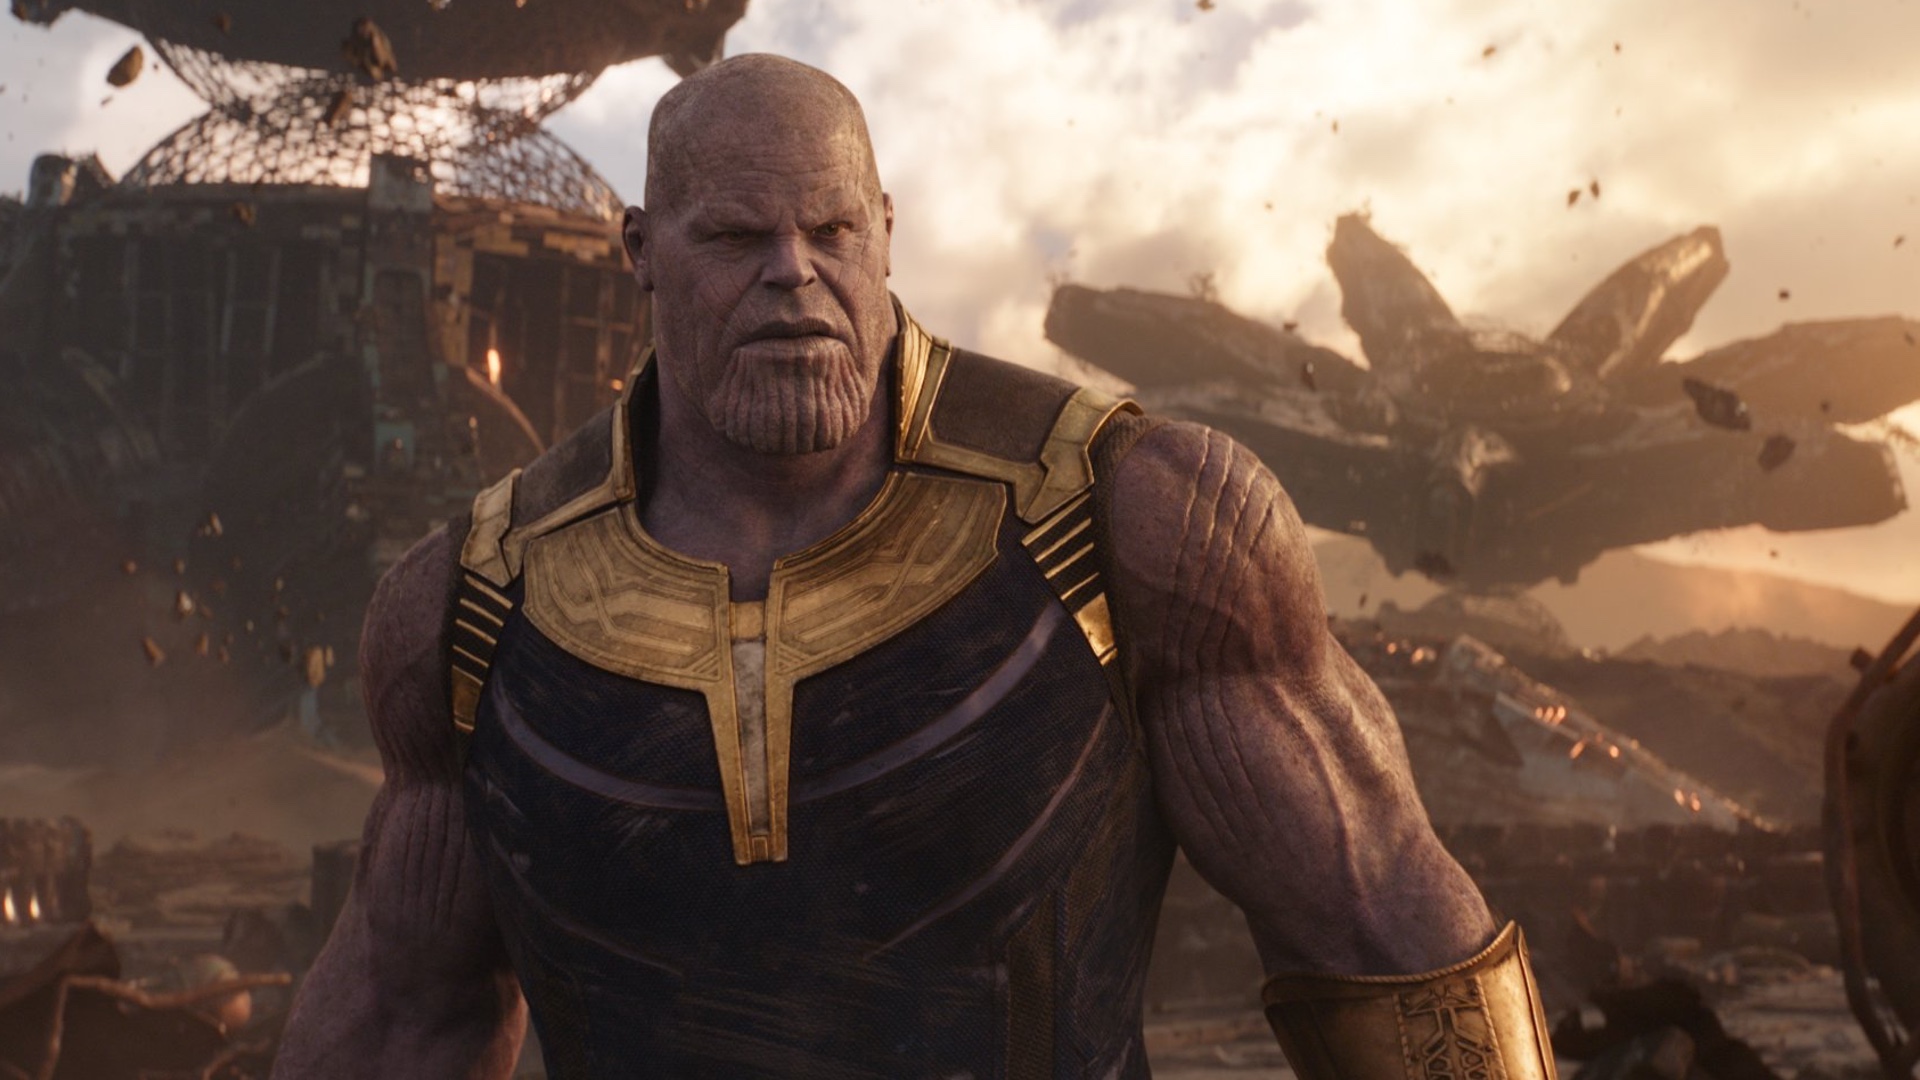 a-new-website-tells-you-whether-of-not-you-were-killed-by-thanos-social.jpg